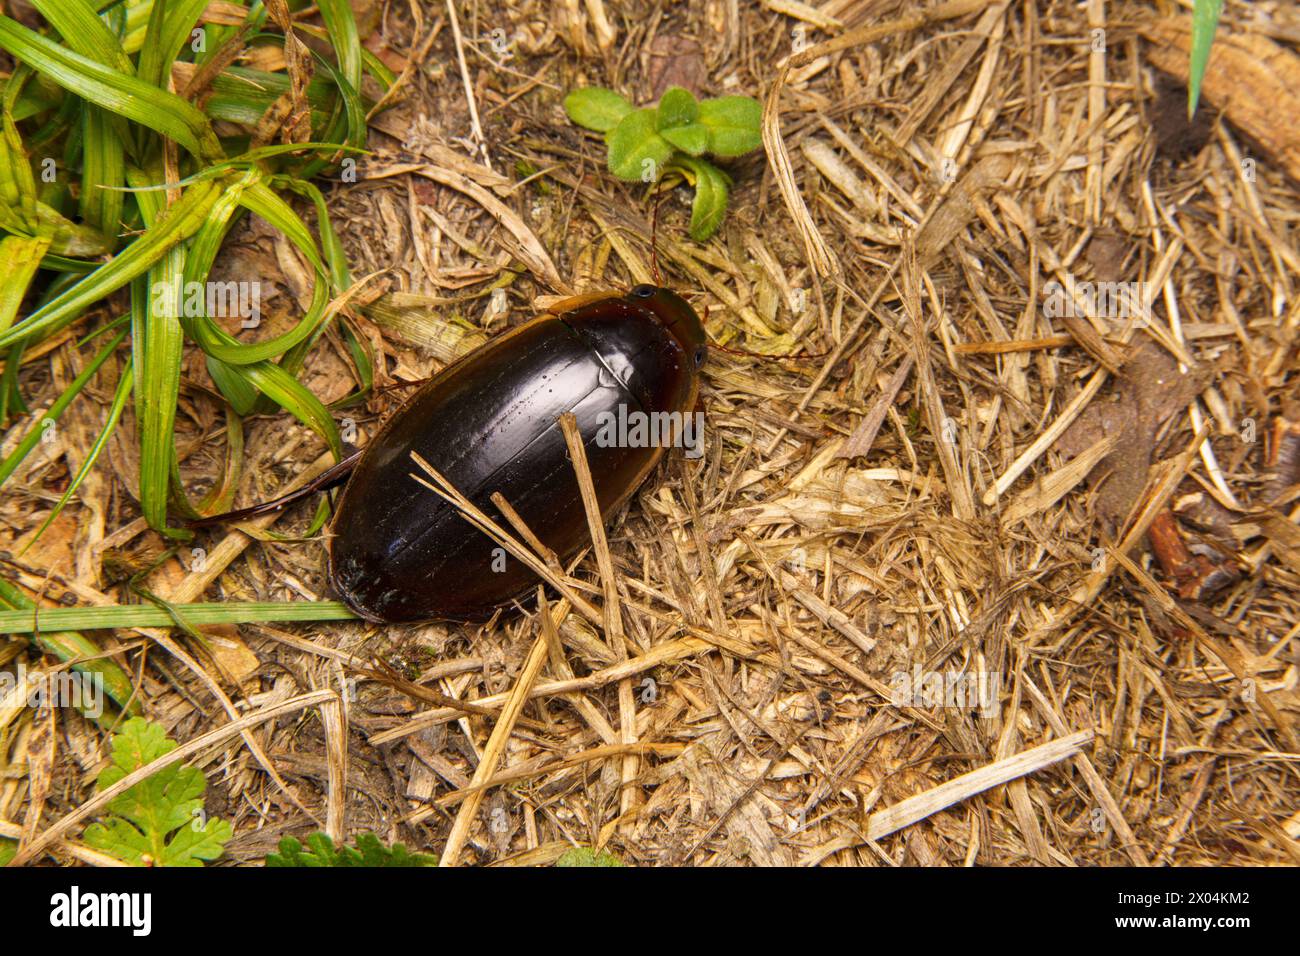 Dytiscus dimidiatus Family Dytiscidae King Diving-beetle wild nature insect photography, picture, wallpaper Stock Photo